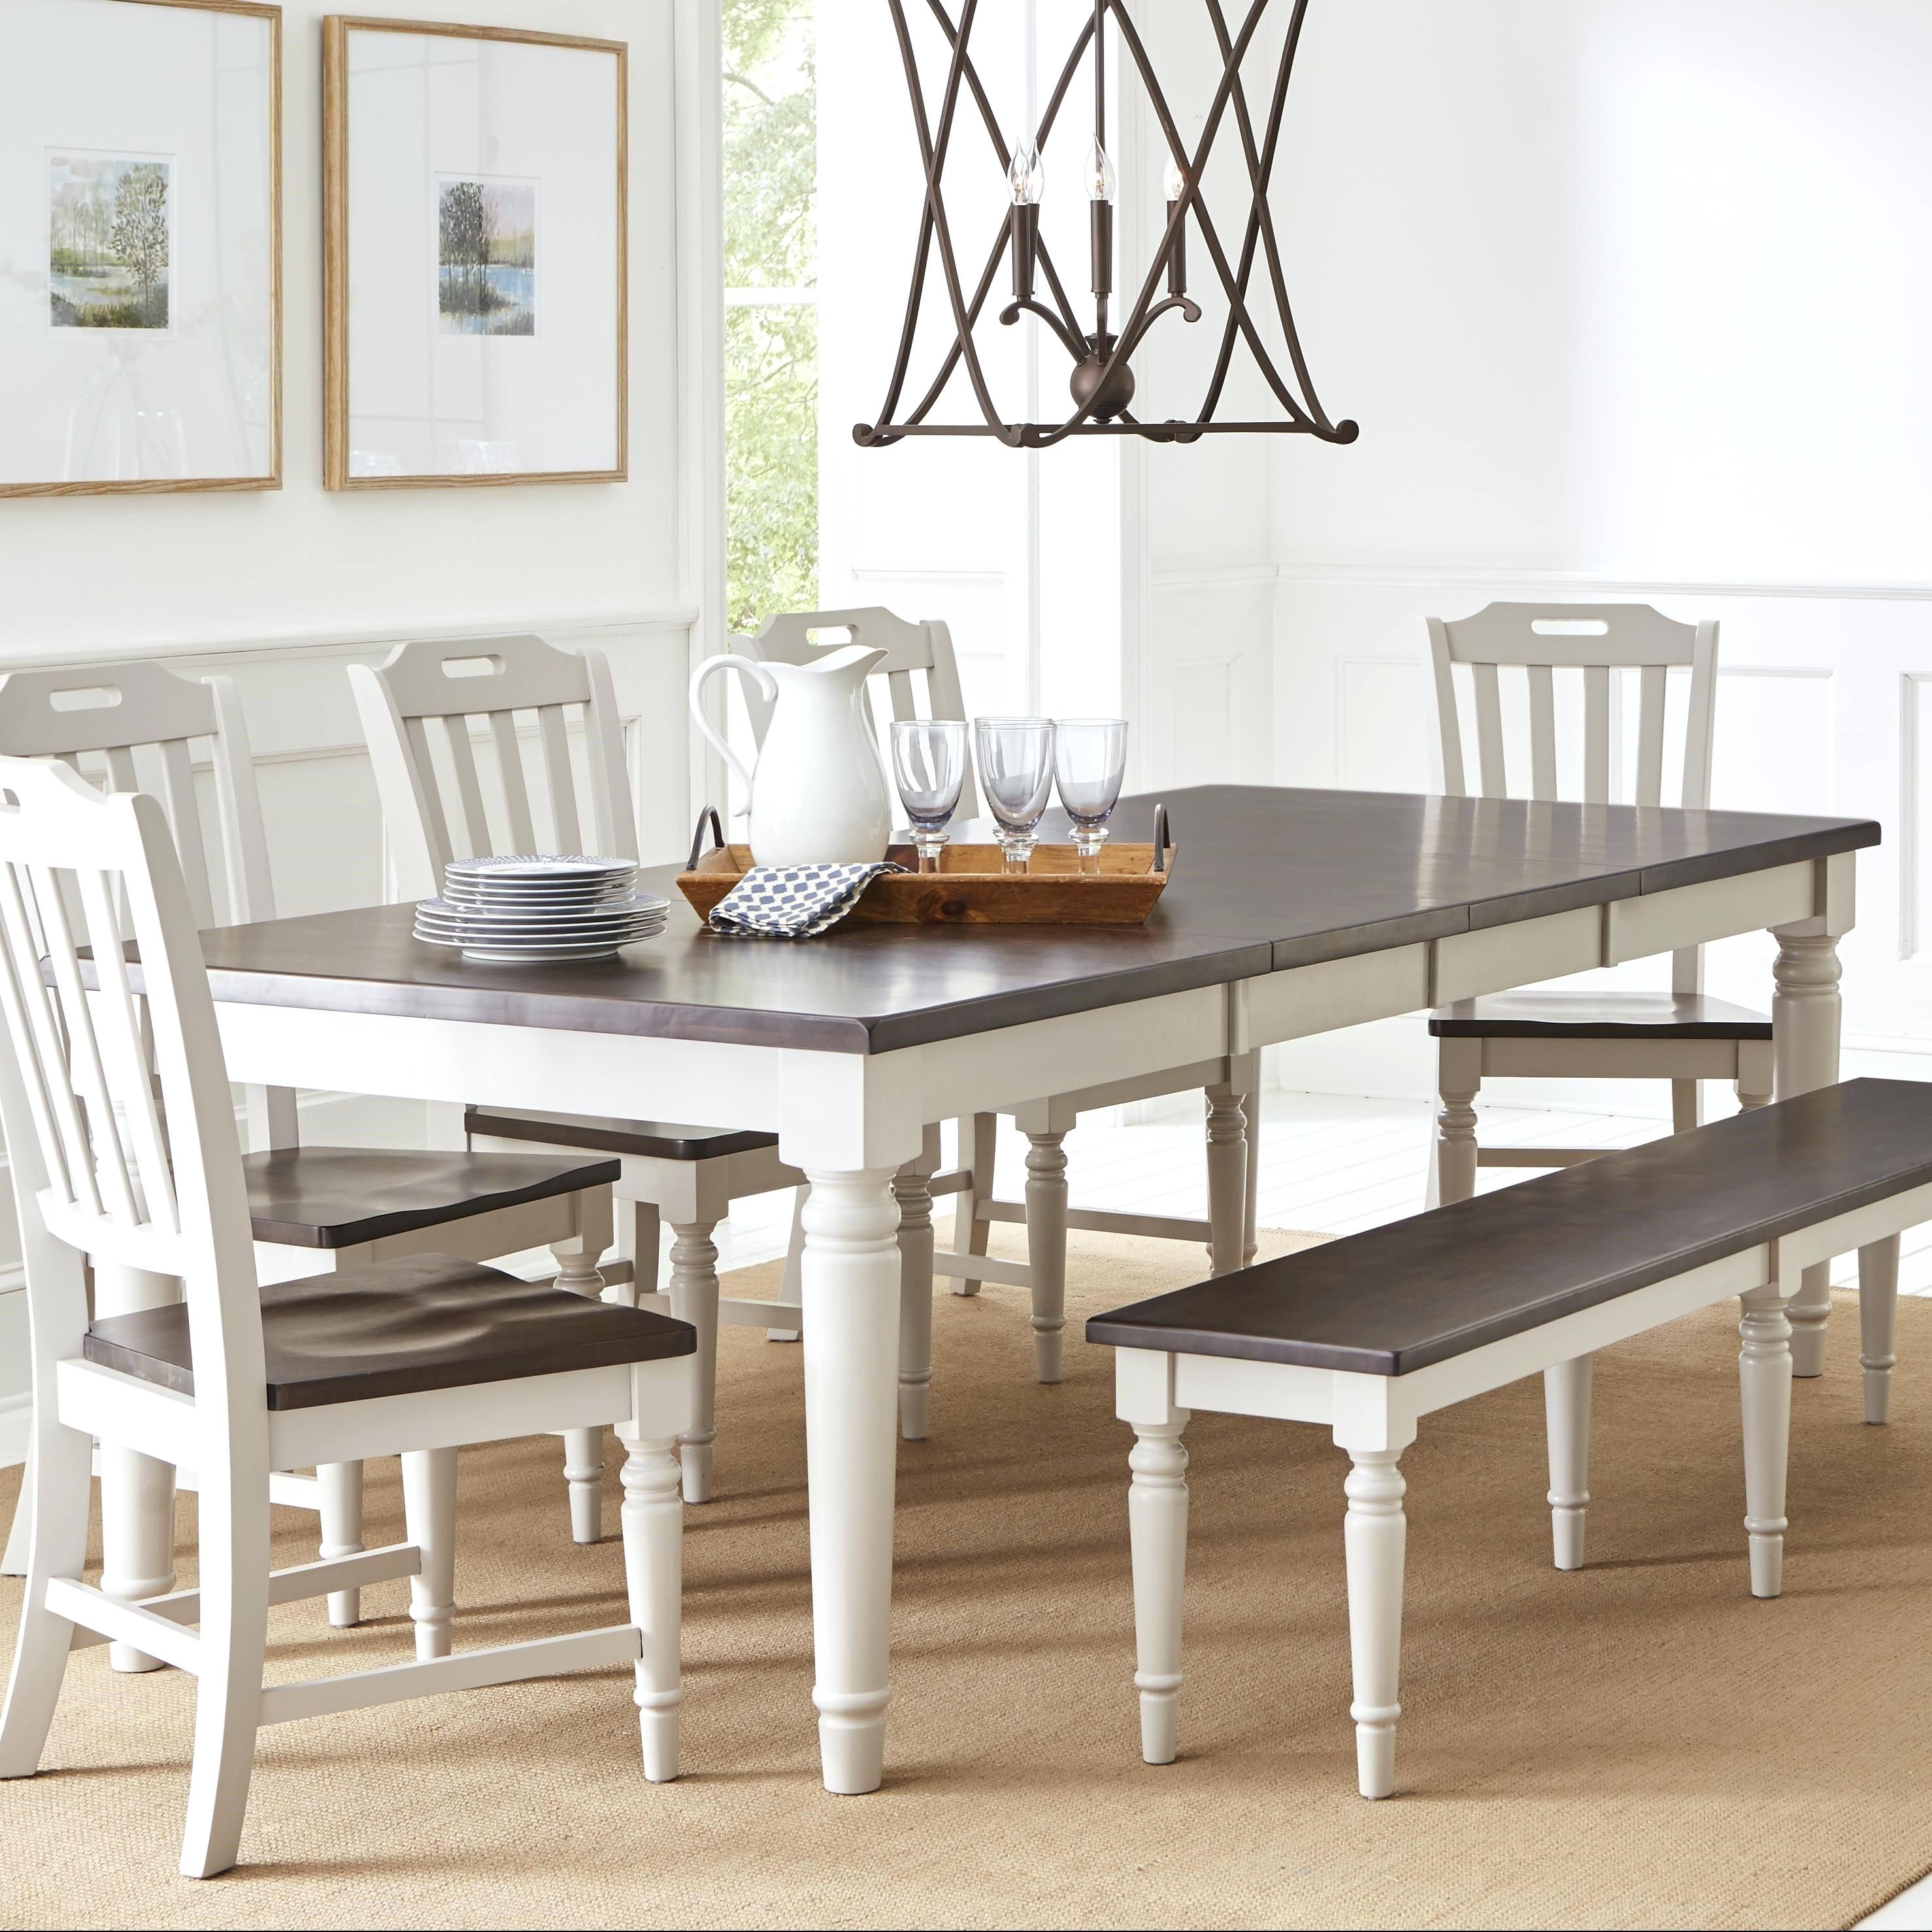 96 Dining Table Rectangle Nautical X Dining Table Nct Home Bar Ideas Pertaining To Most Recent Magnolia Home White Keeping 96 Inch Dining Tables (View 19 of 20)